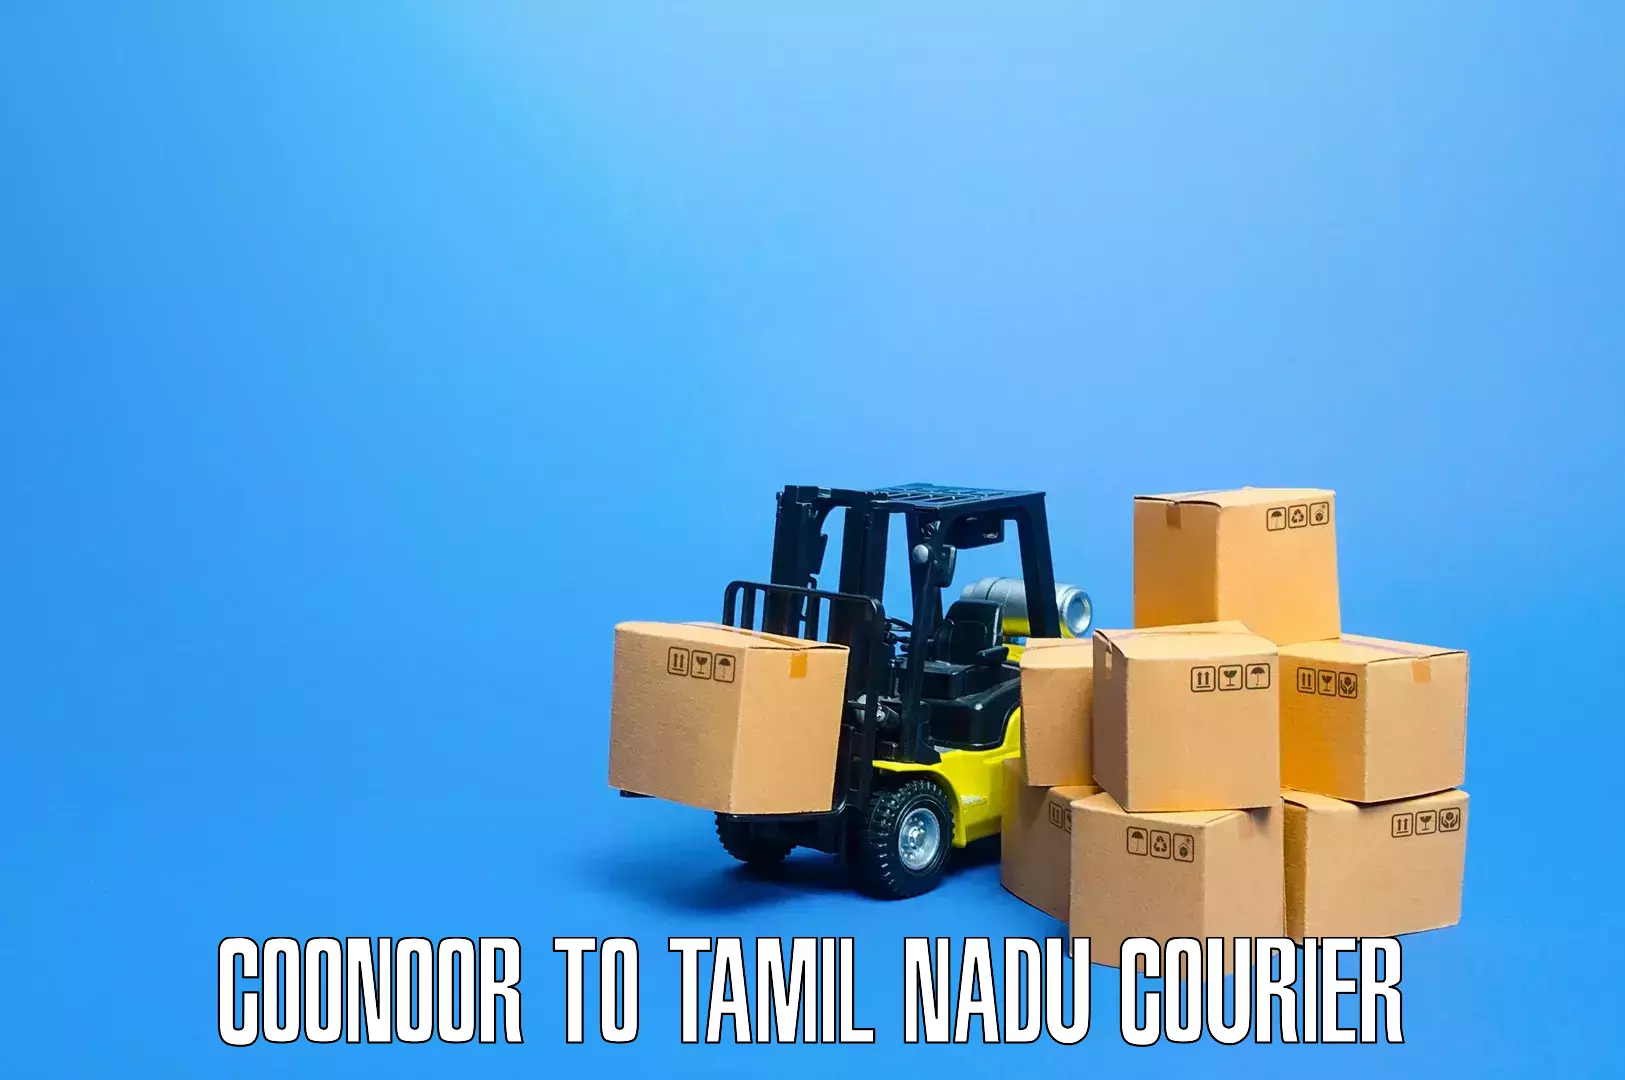 Household goods transporters Coonoor to Meenakshi Academy of Higher Education and Research Chennai